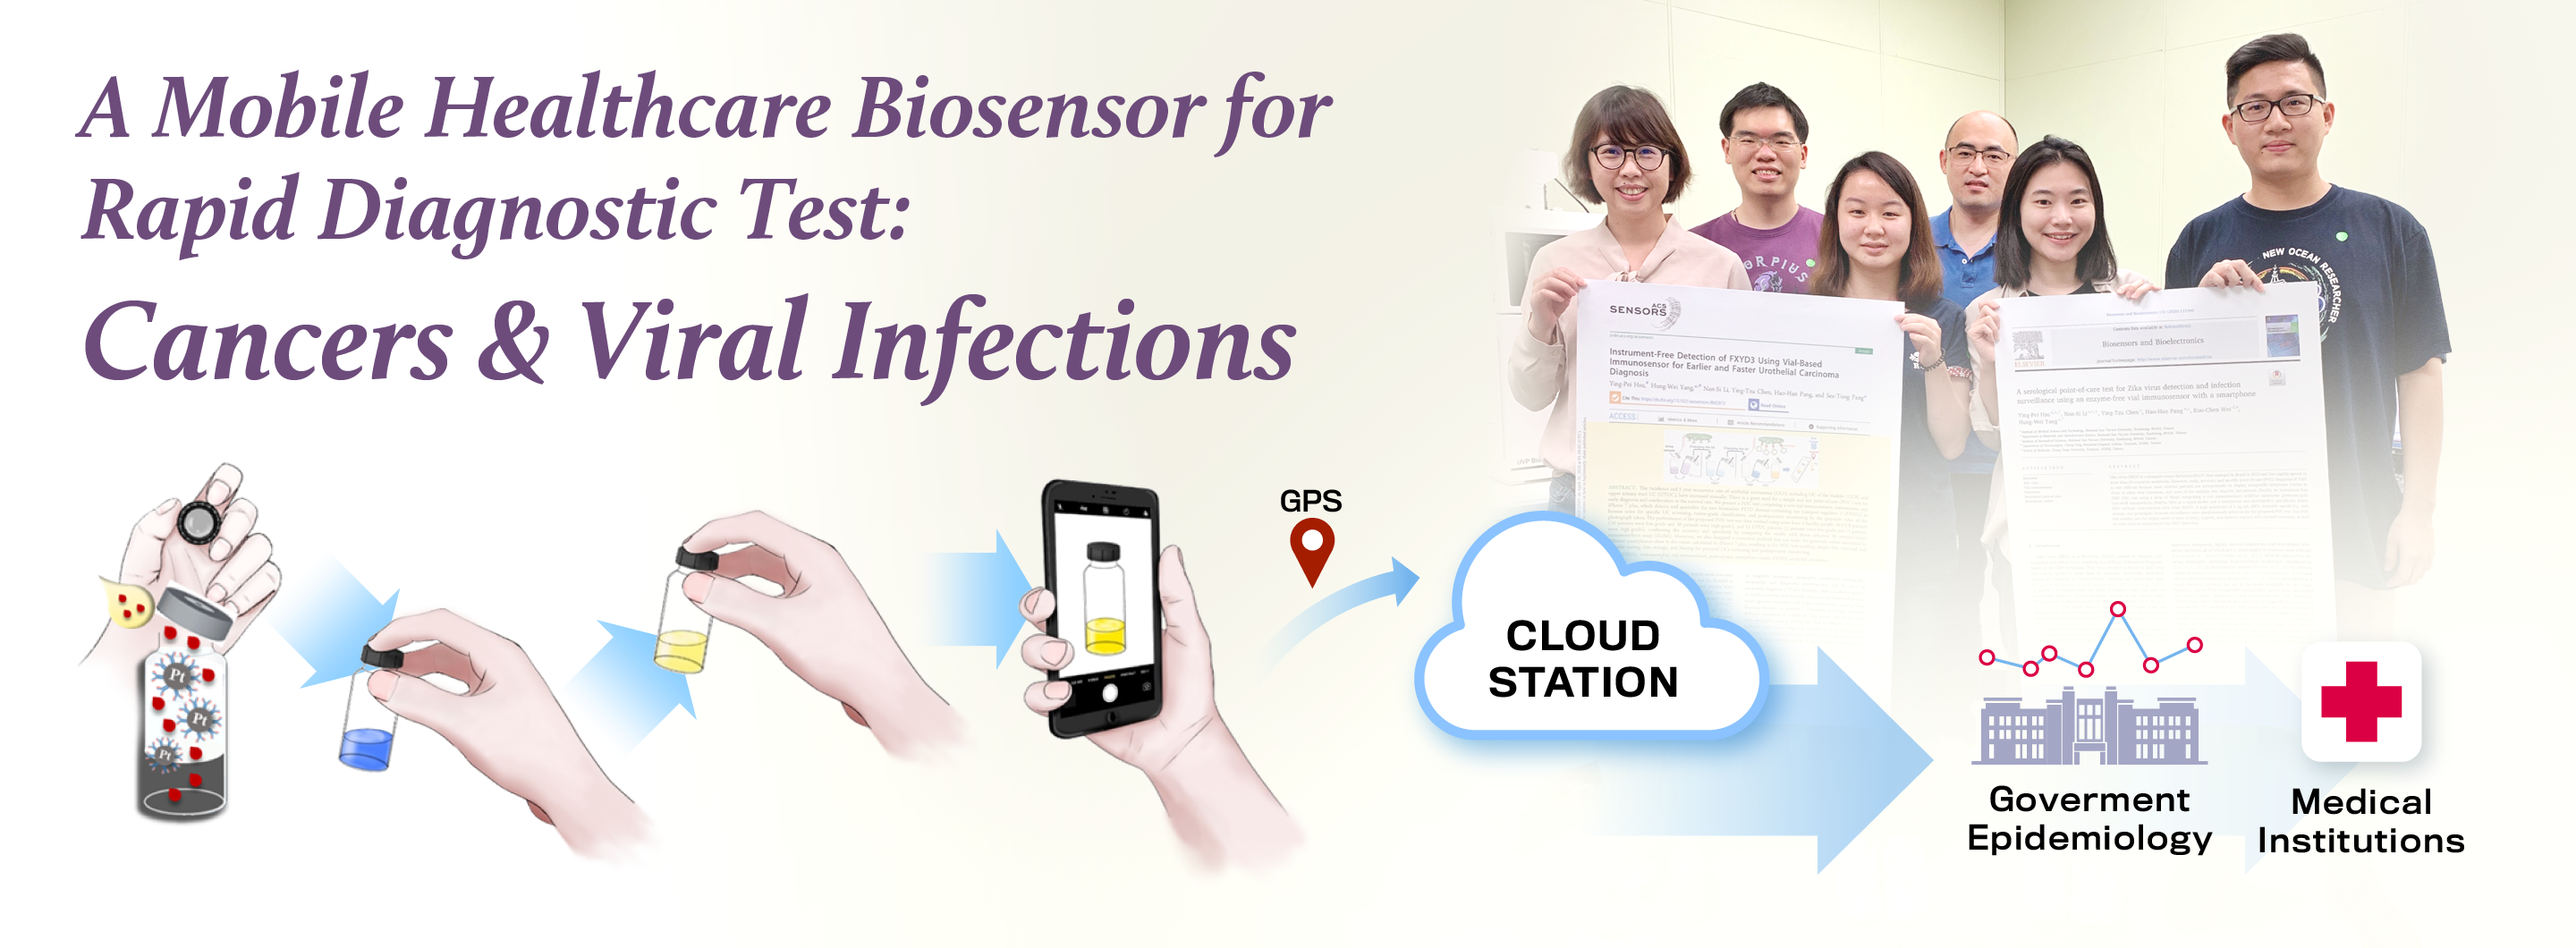 A Mobile Healthcare Biosensor for Rapid Diagnostic Test: Cancers and Viral Infections